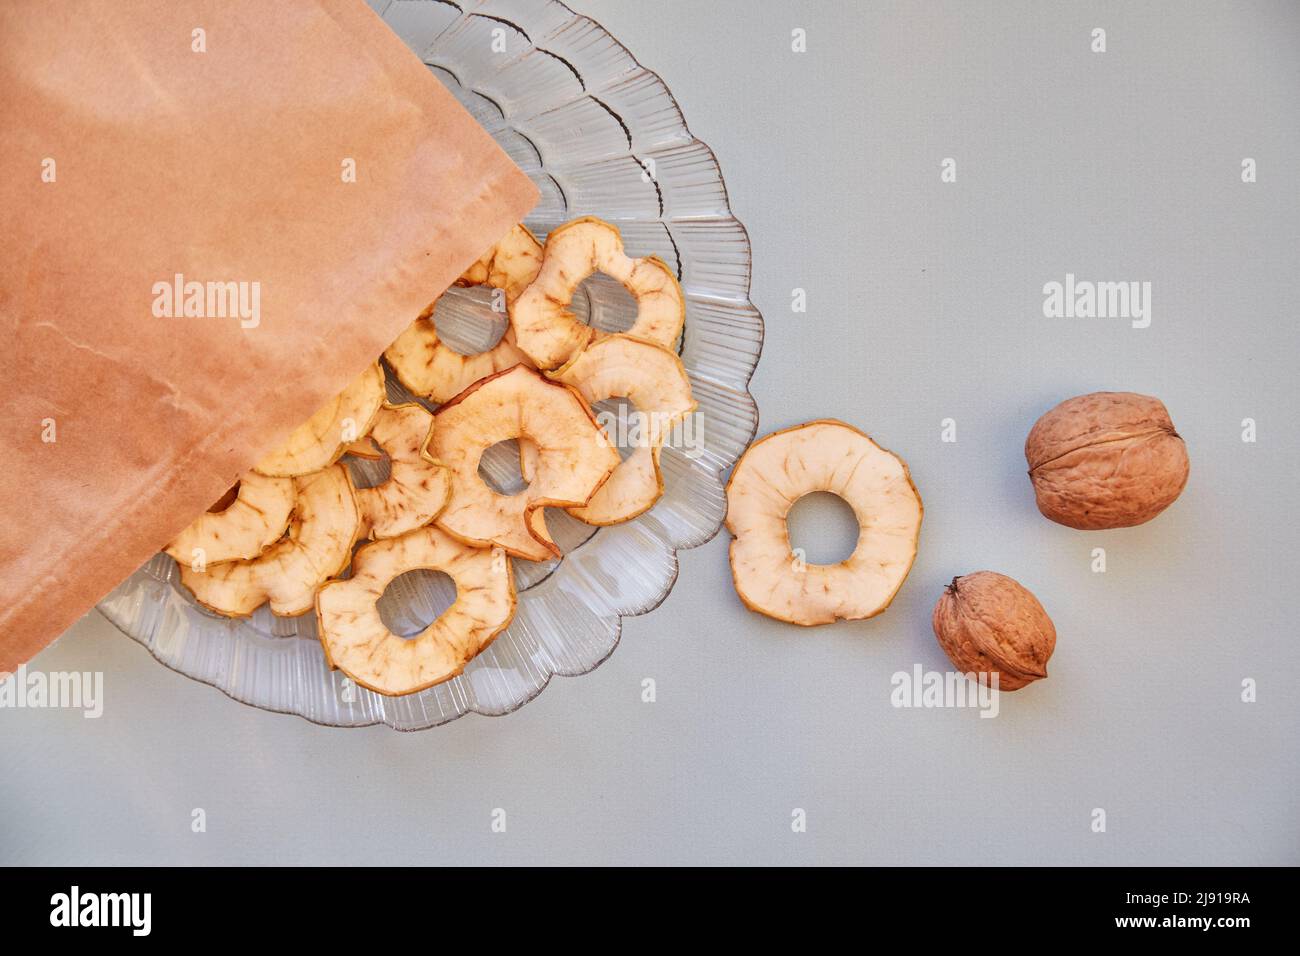 Paper bag with dried sliced apple chips and walnuts - healthy snacks on the plate. Top view. Proper nutrition, healthy food concept. High quality photo Stock Photo